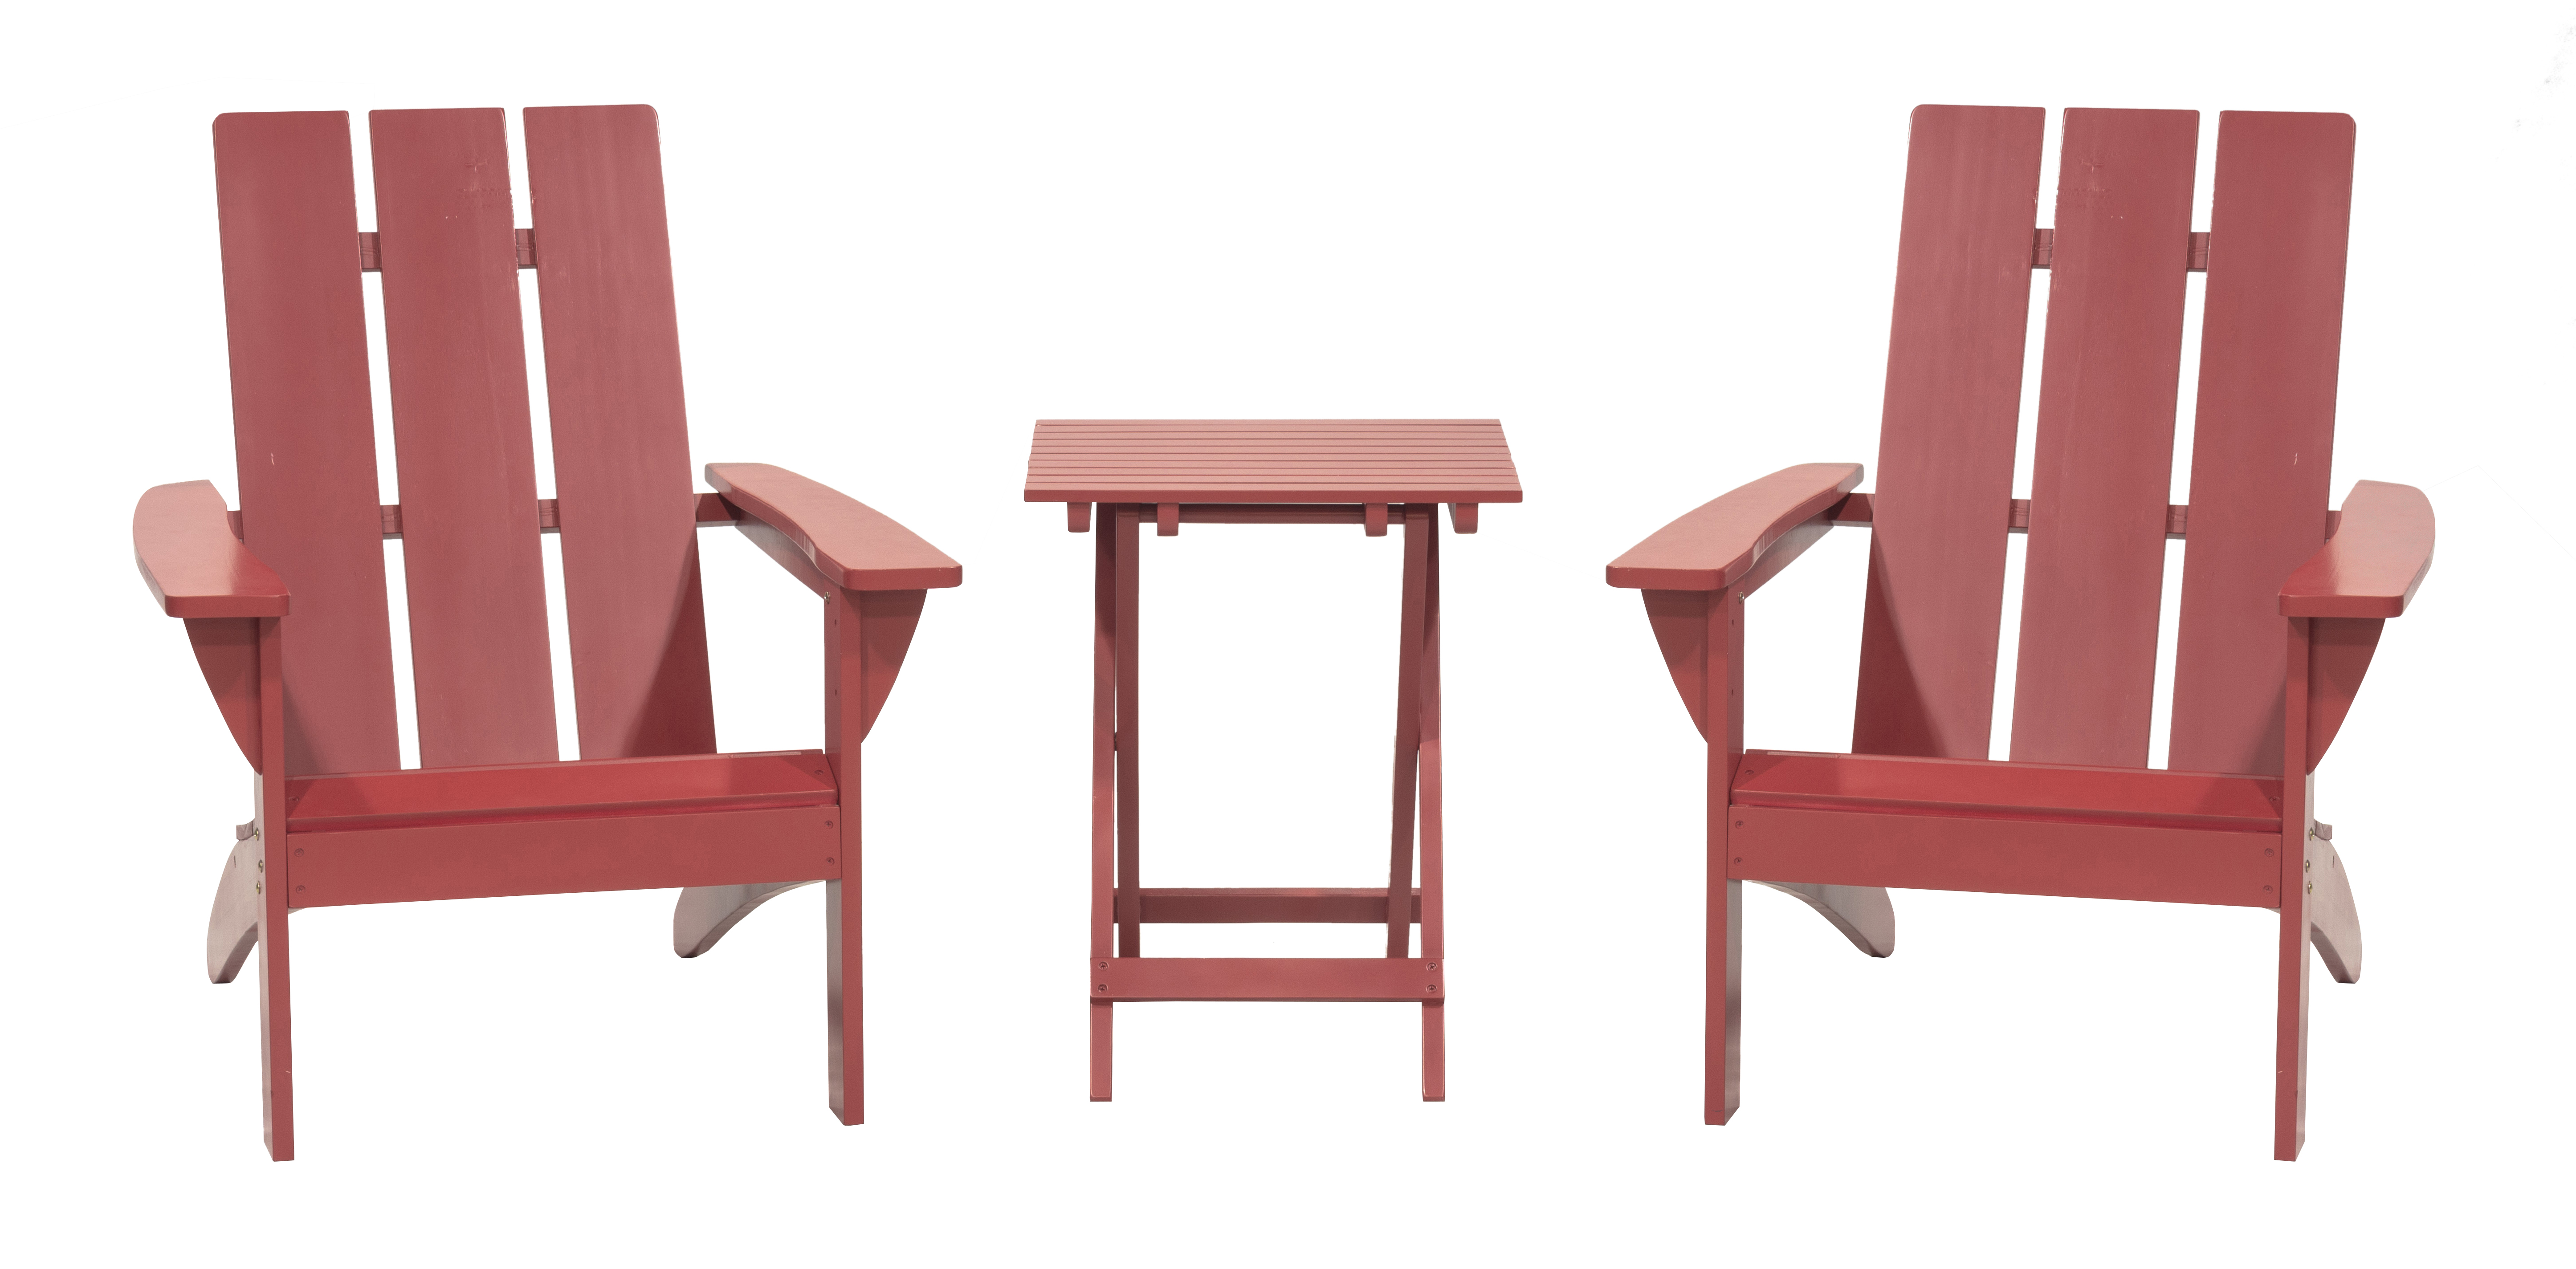 Outdoor Patio Garden Furniture 3-Piece Wood Adirondack Chair Set, Weather Resistant Finish,2 Adirondack Chairs and 1 Side Table-Red - image 2 of 11